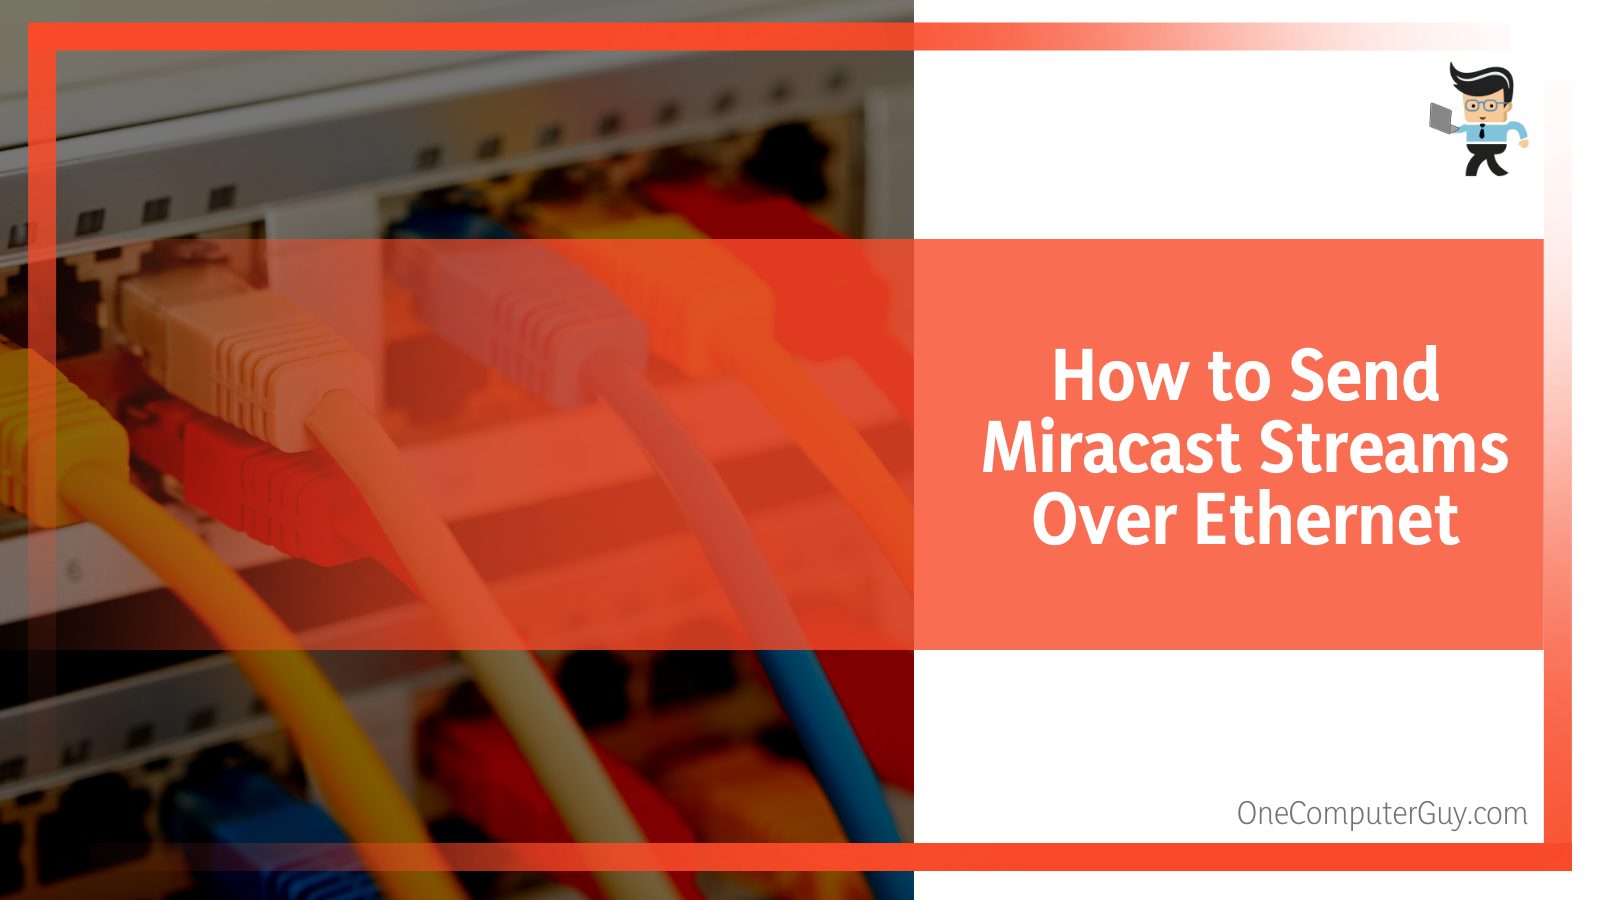 How to Send Miracast Streams Over Ethernet